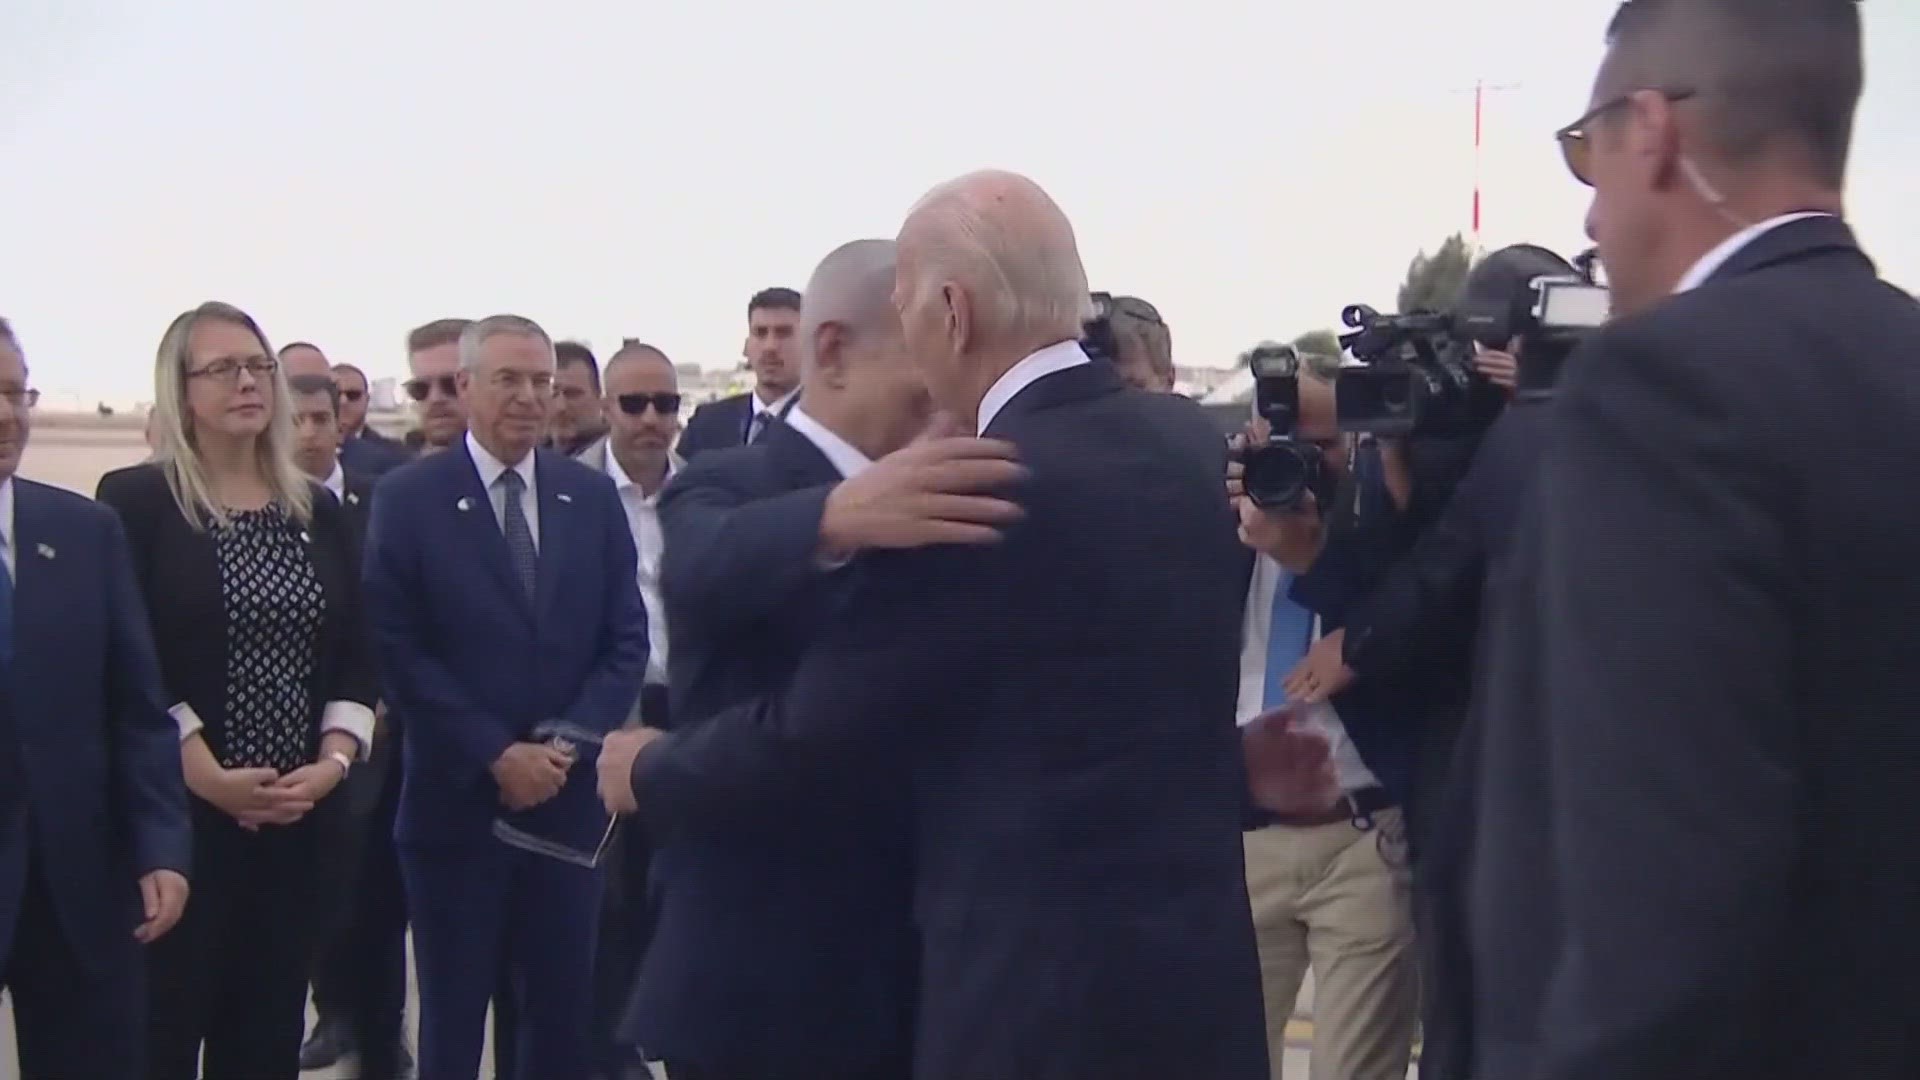 President Biden opened his visit to Israel by vowing to show the world that the U.S. stands in solidarity with the Jewish people.